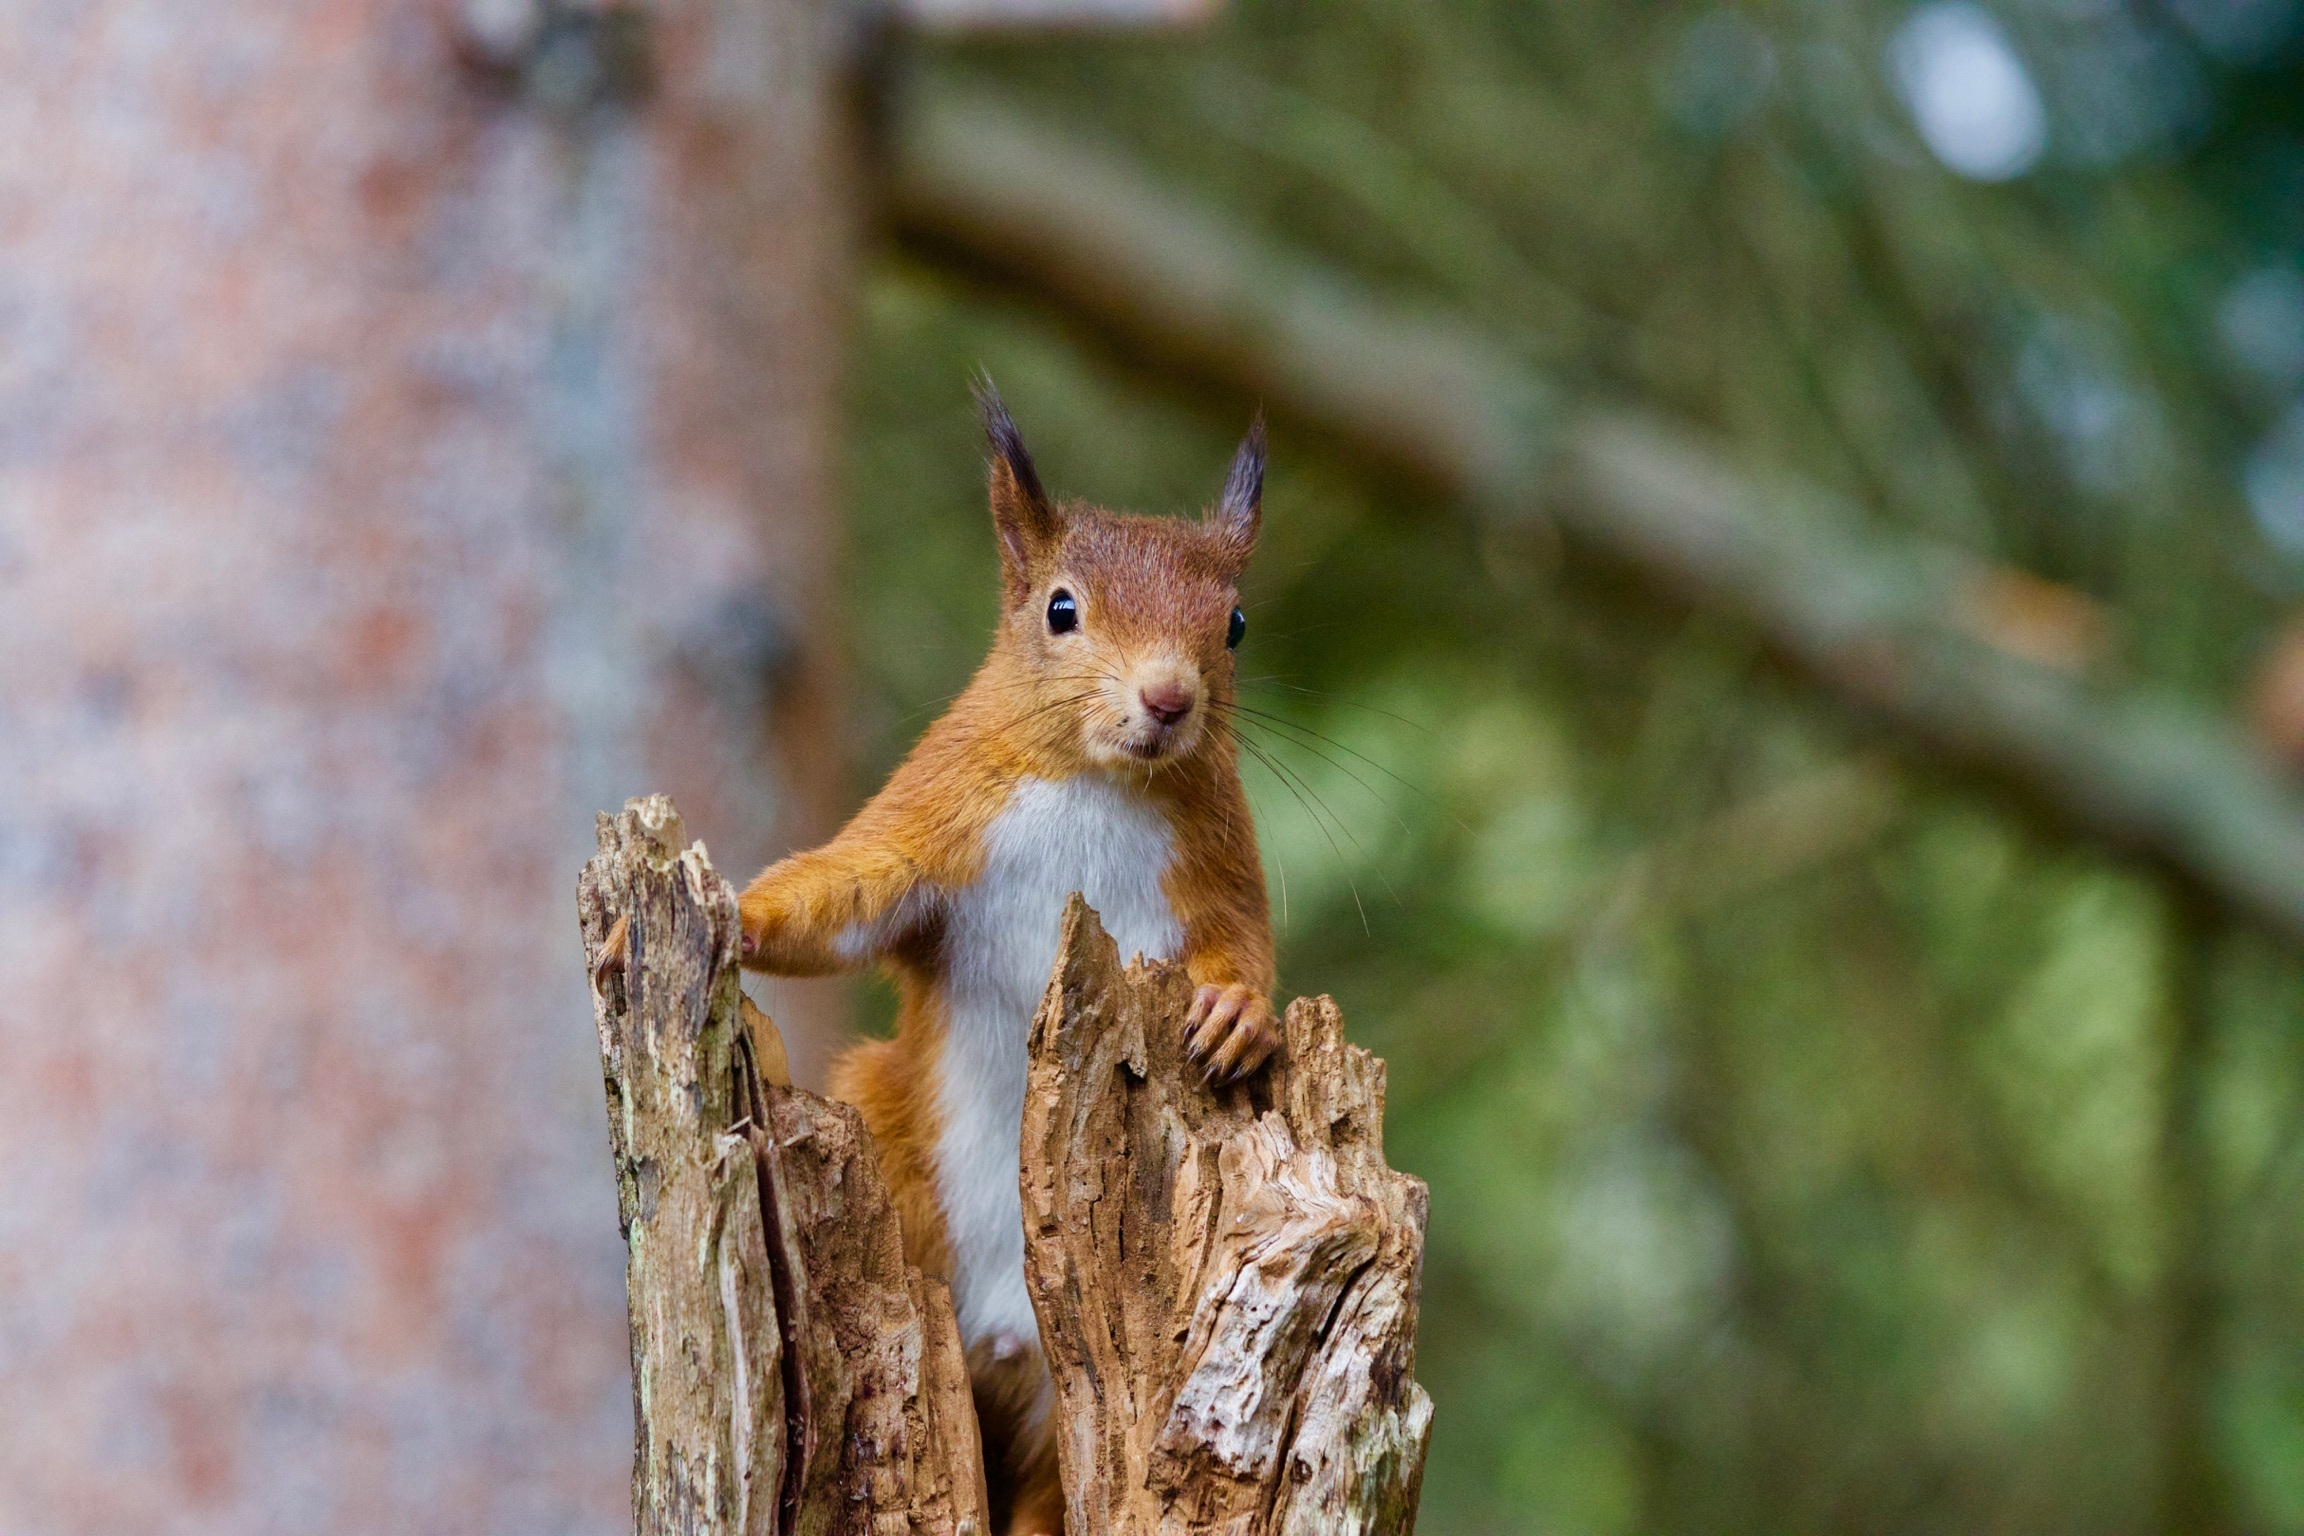 Fears have been raised the new road could reduce habitat for animals such as the red squirrel